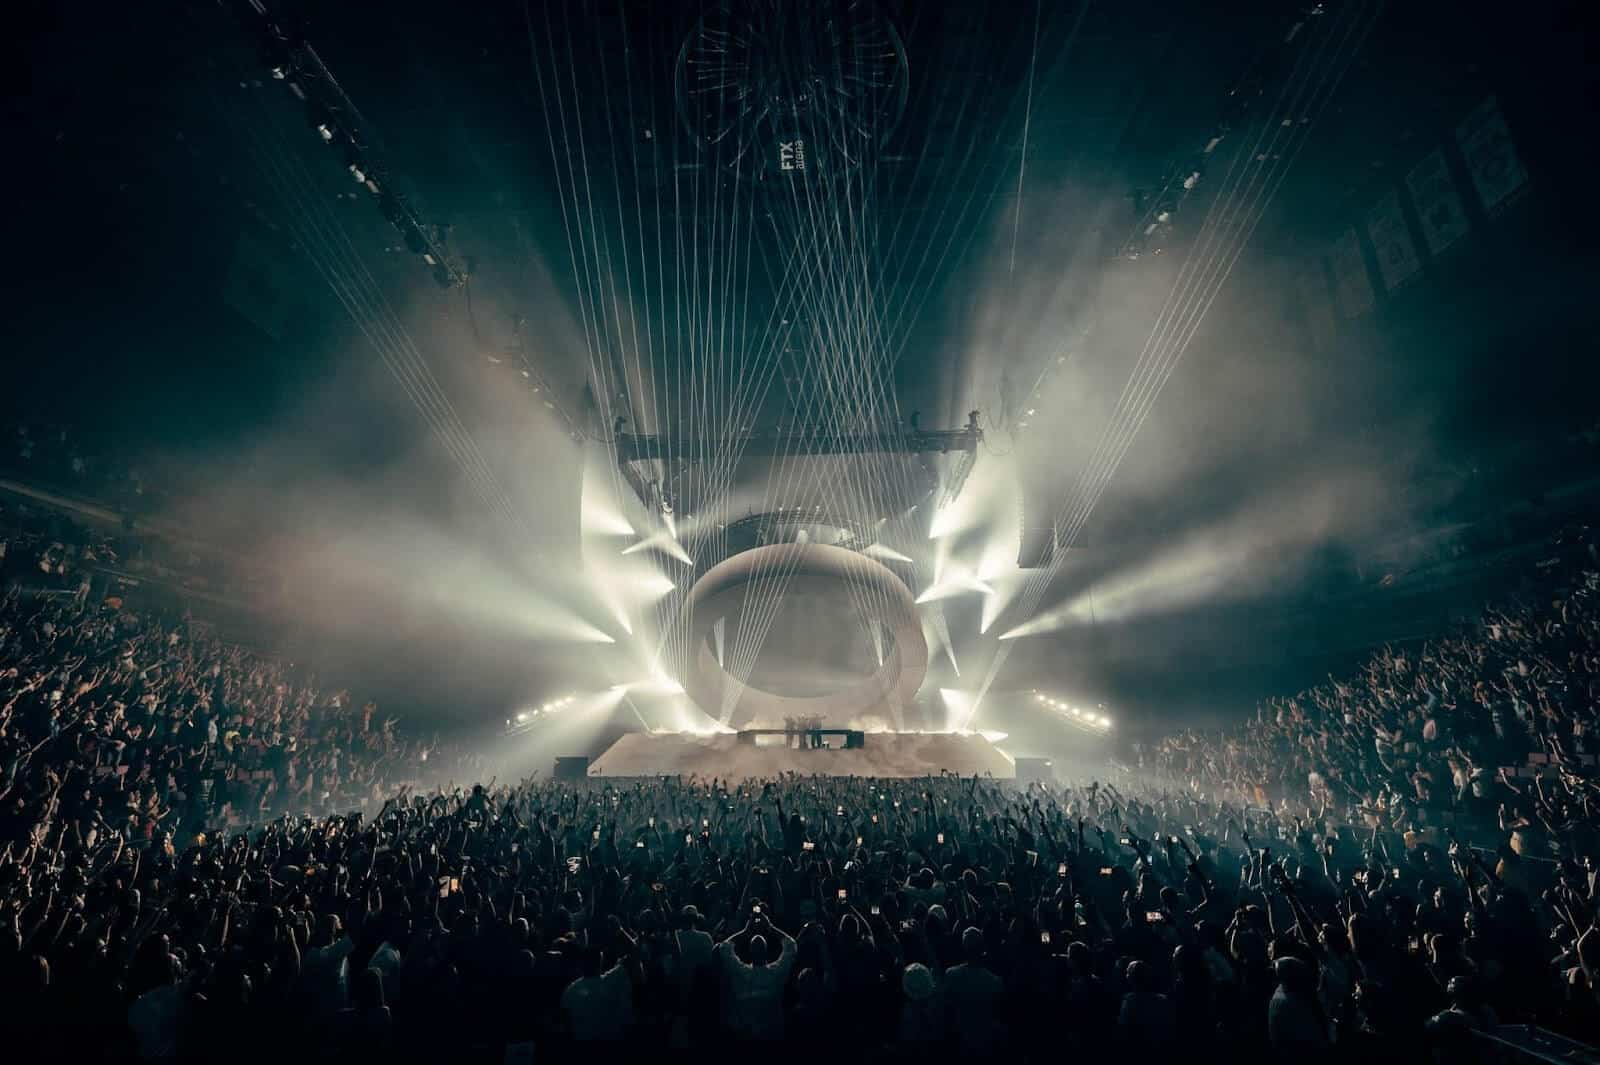 Swedish House Mafia sets the stage on fire at FIFA Club World Cup: Watch